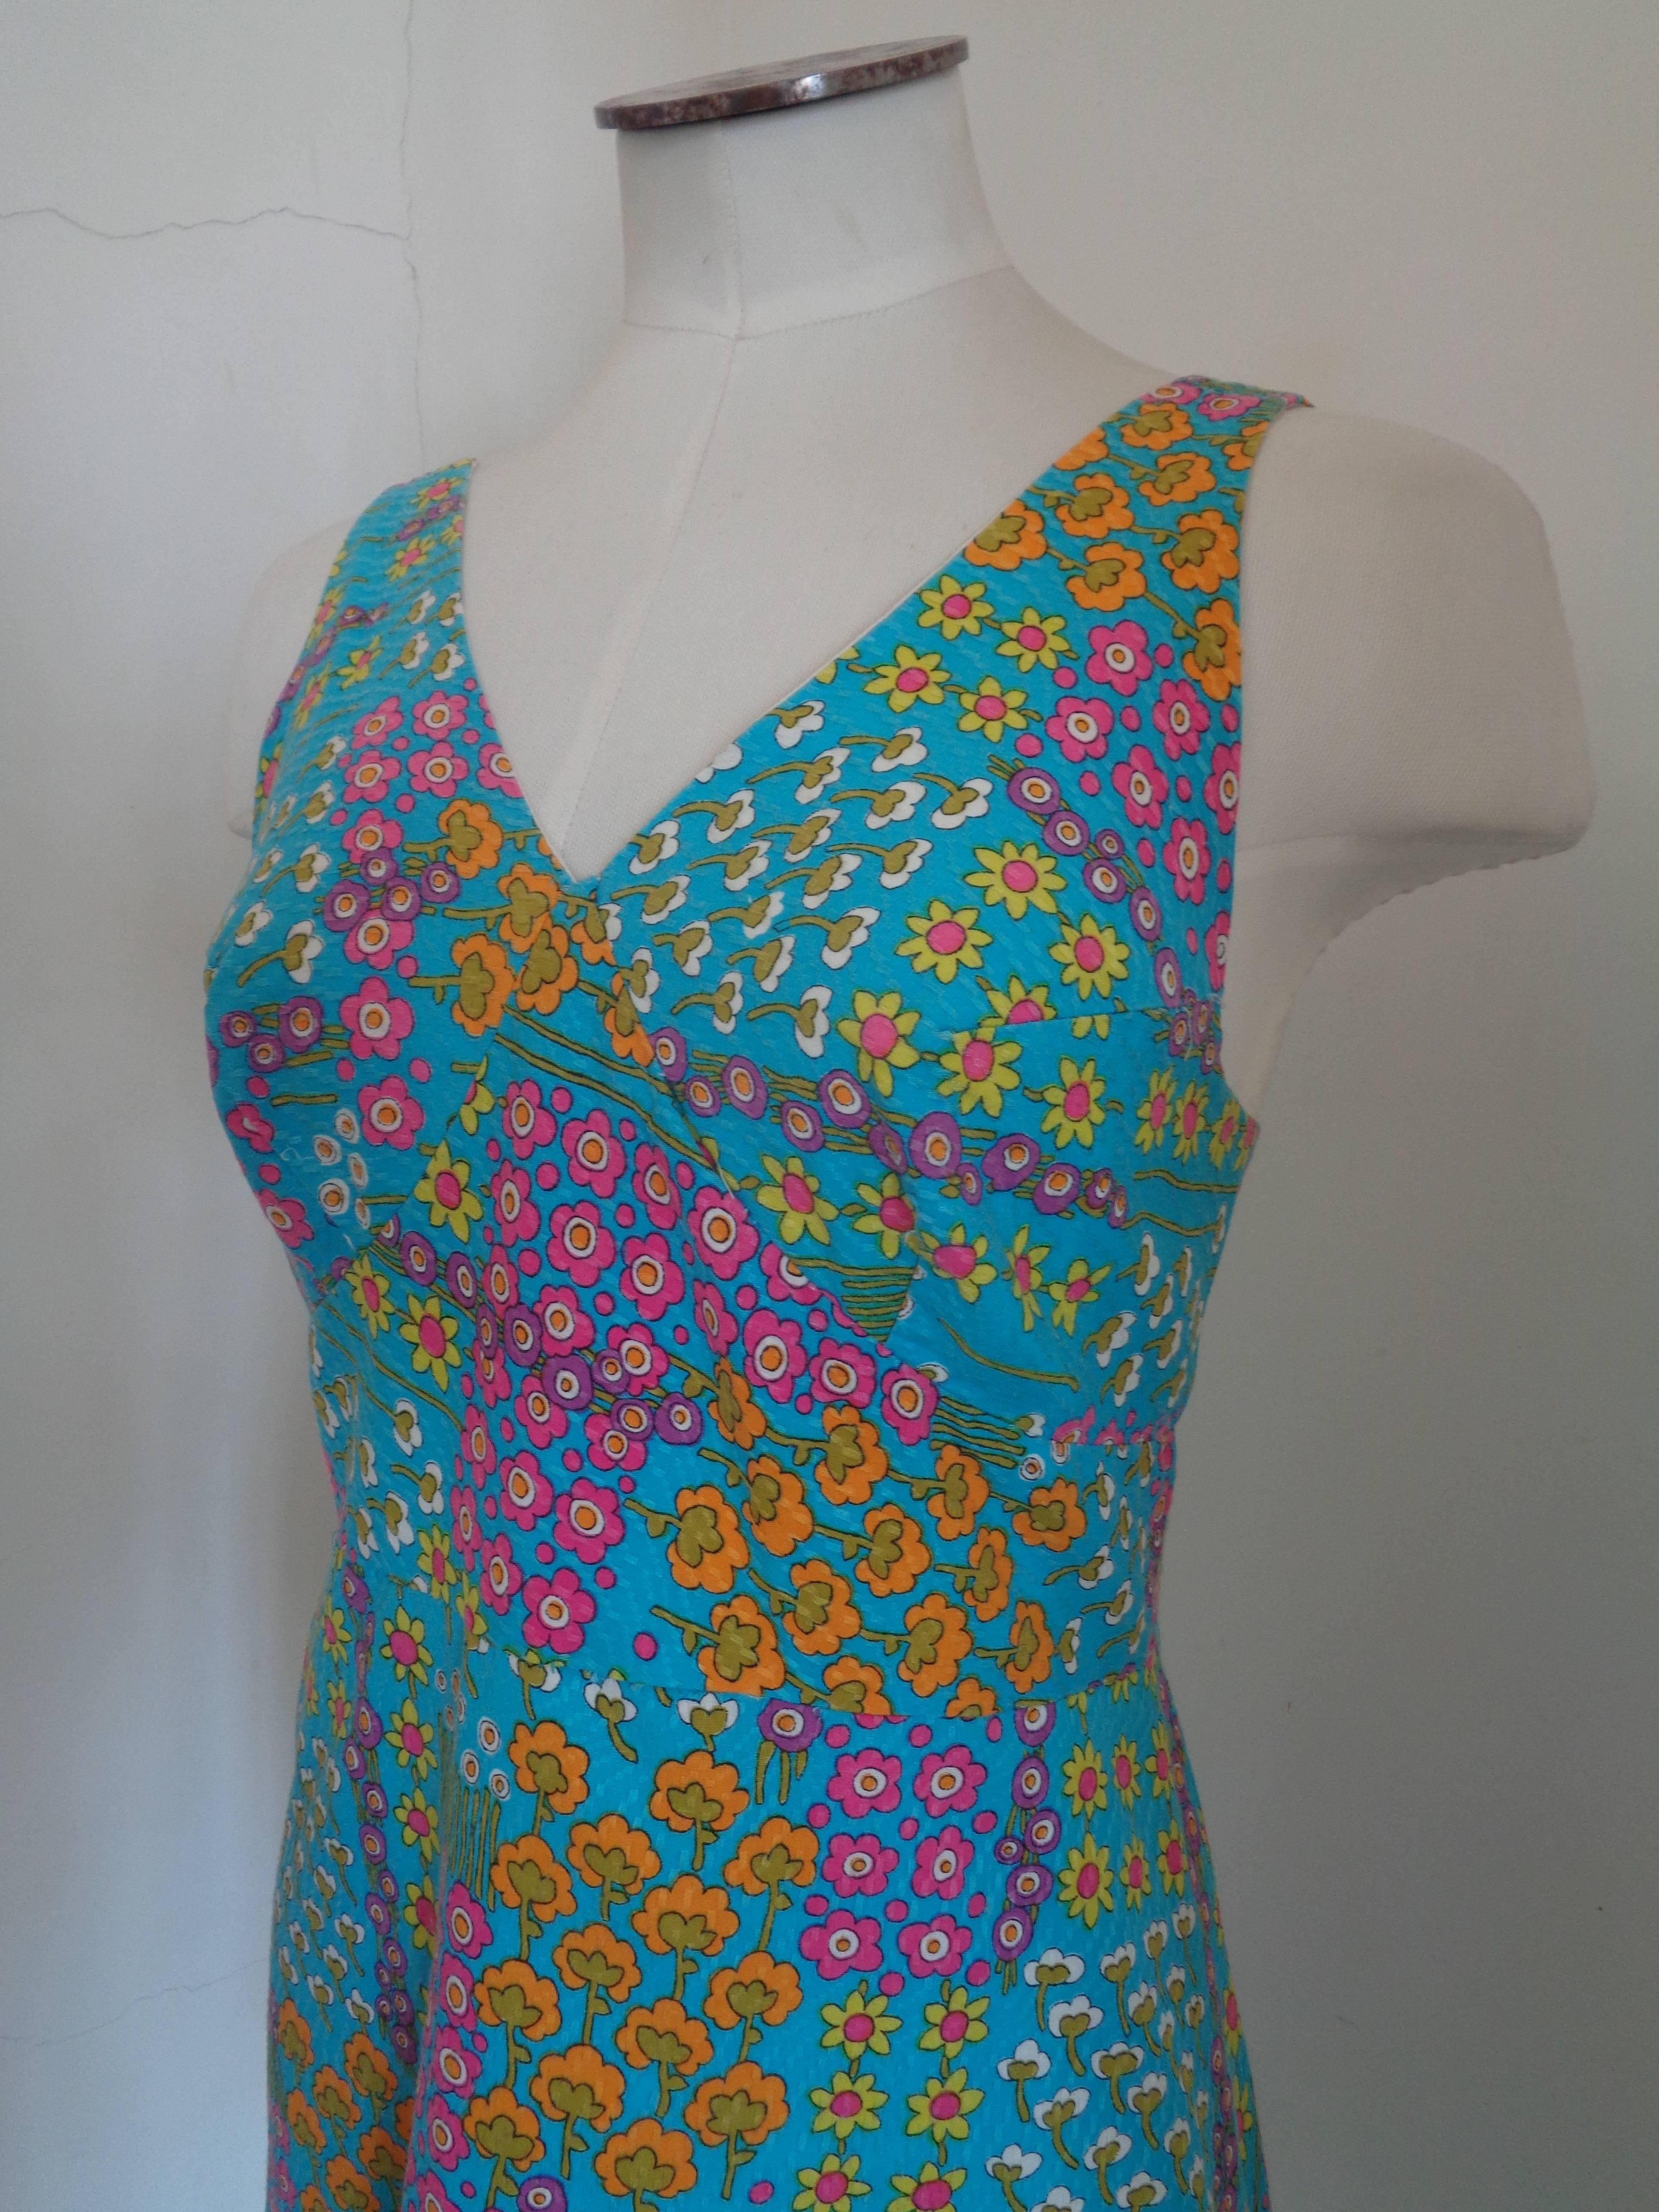 1970s Light Blu Flowers Dress

totally made in italy 
